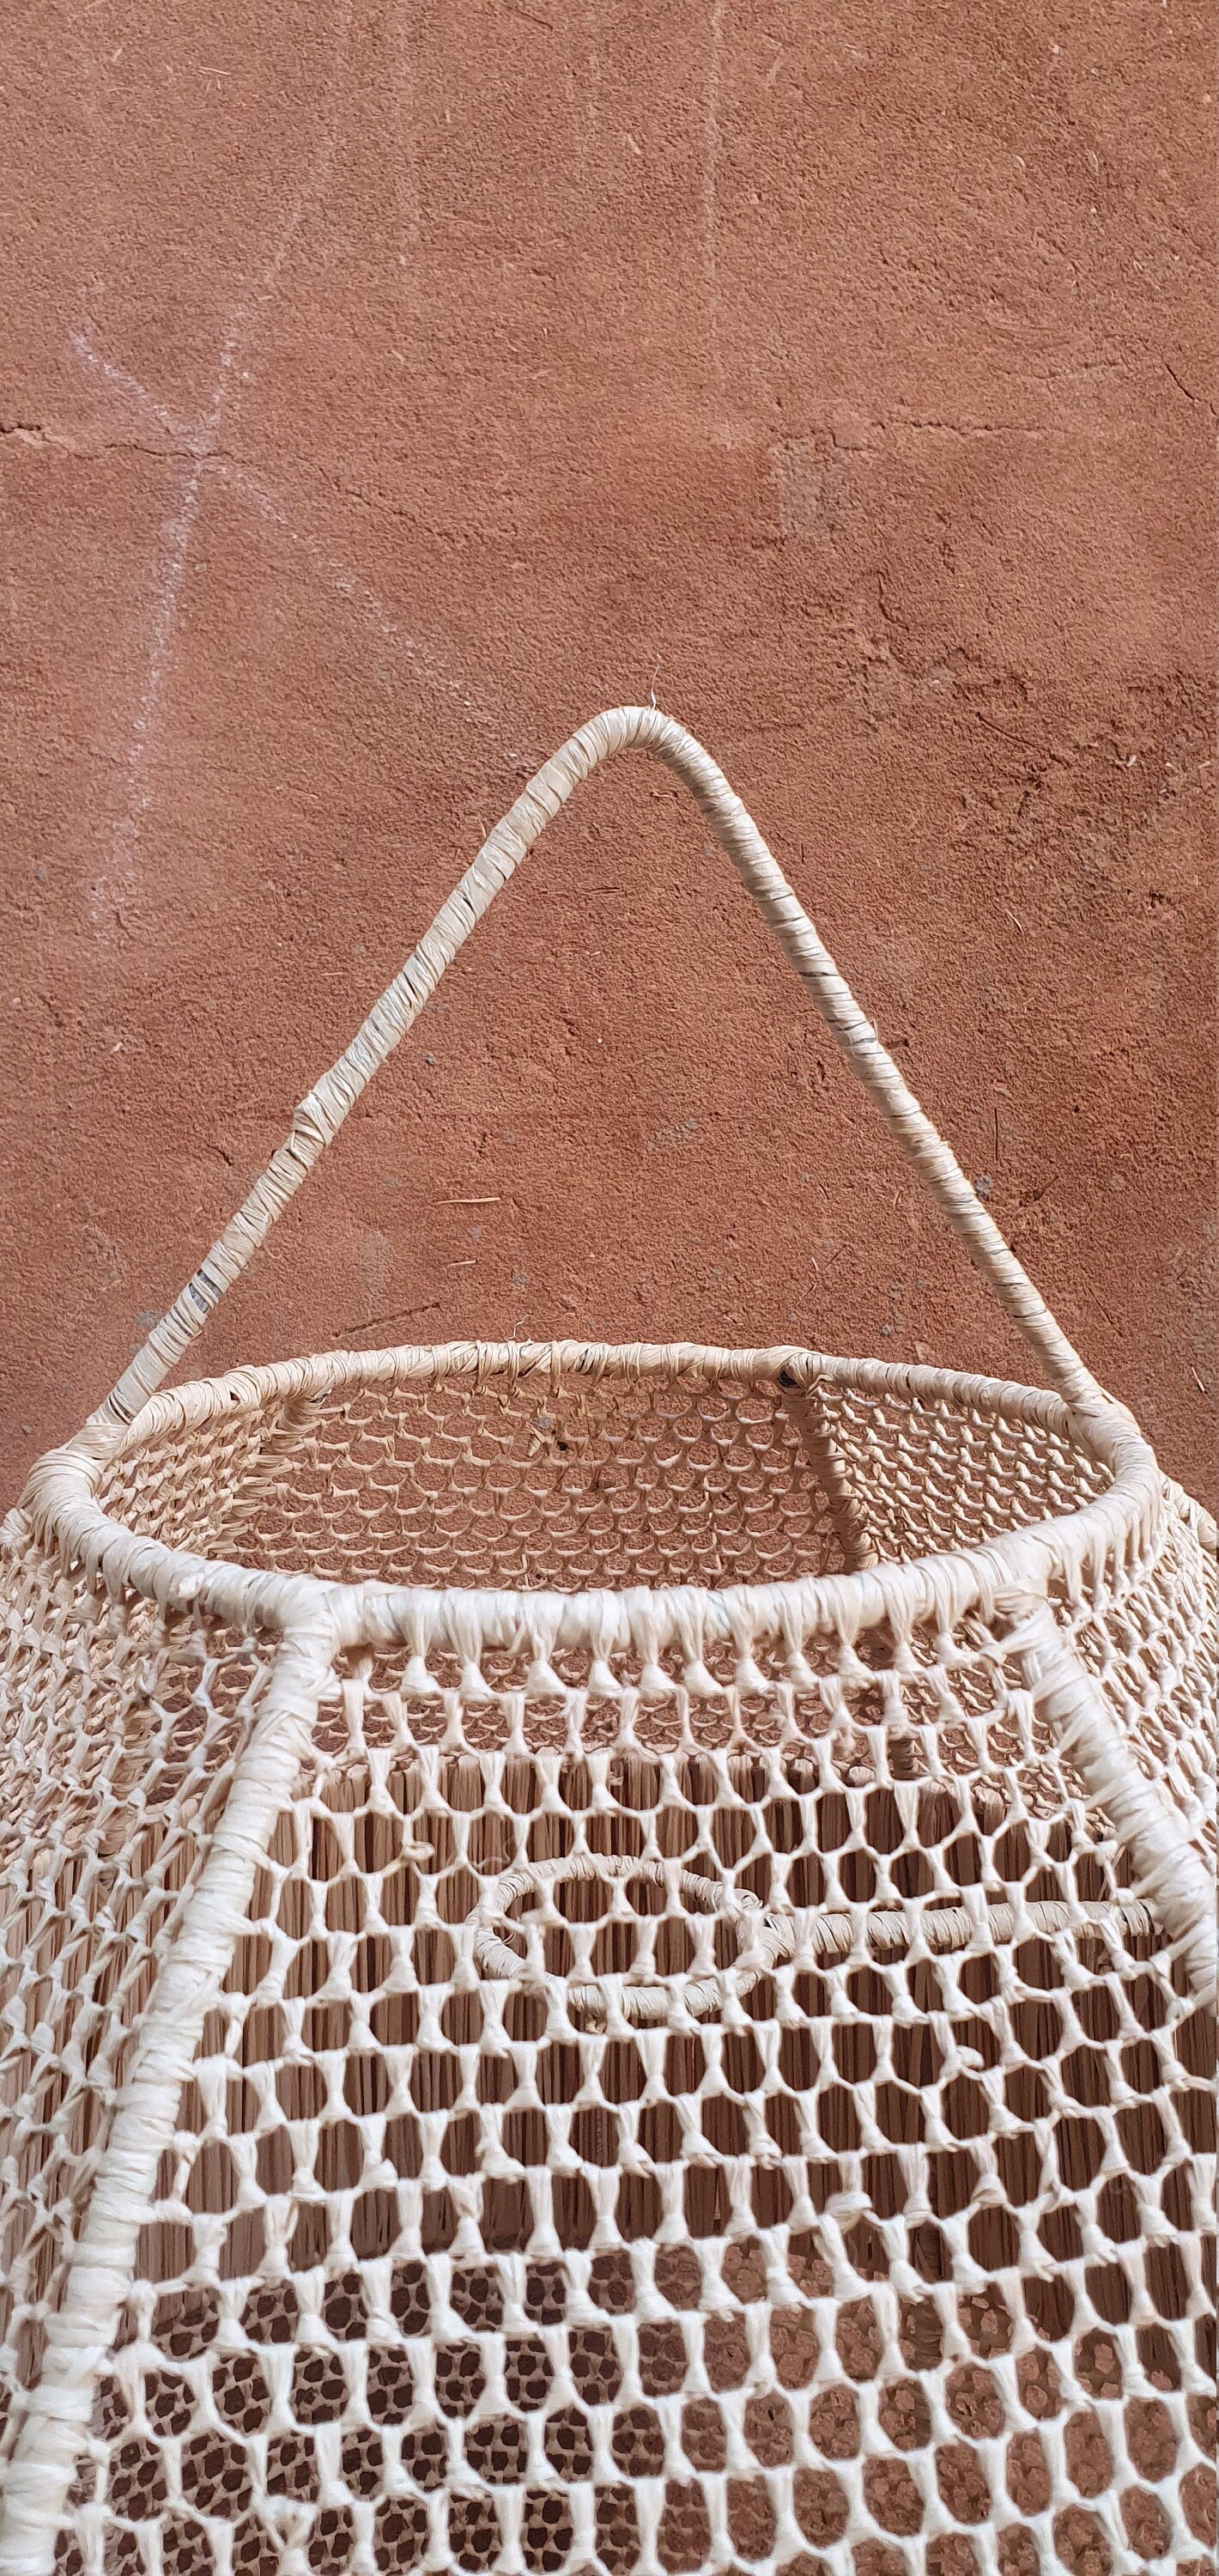 Bohemian-inspired 55cm Raffia Lace Lampshade for interiors